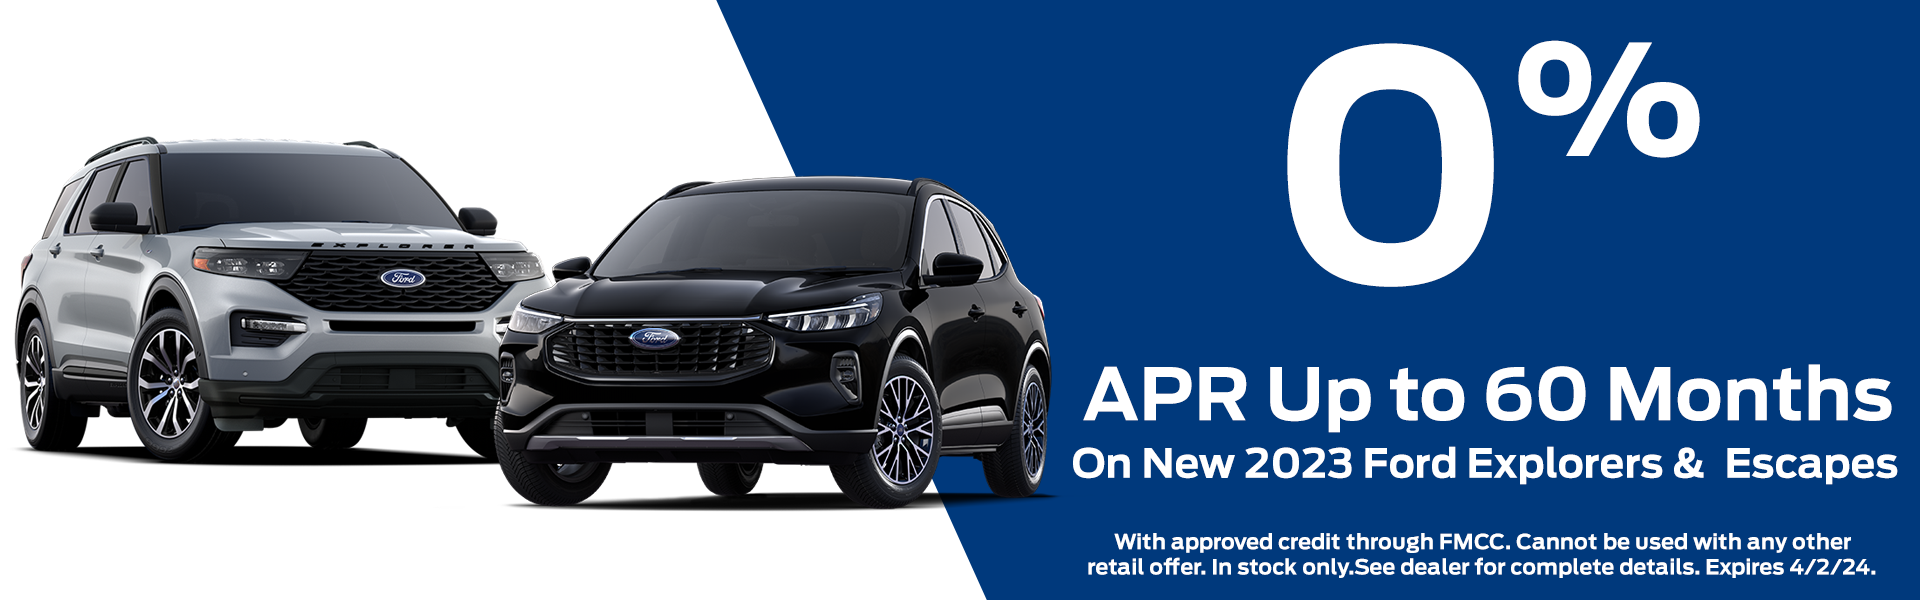 0% APR Up to 60 Months on New 2023 Explorer & Escape